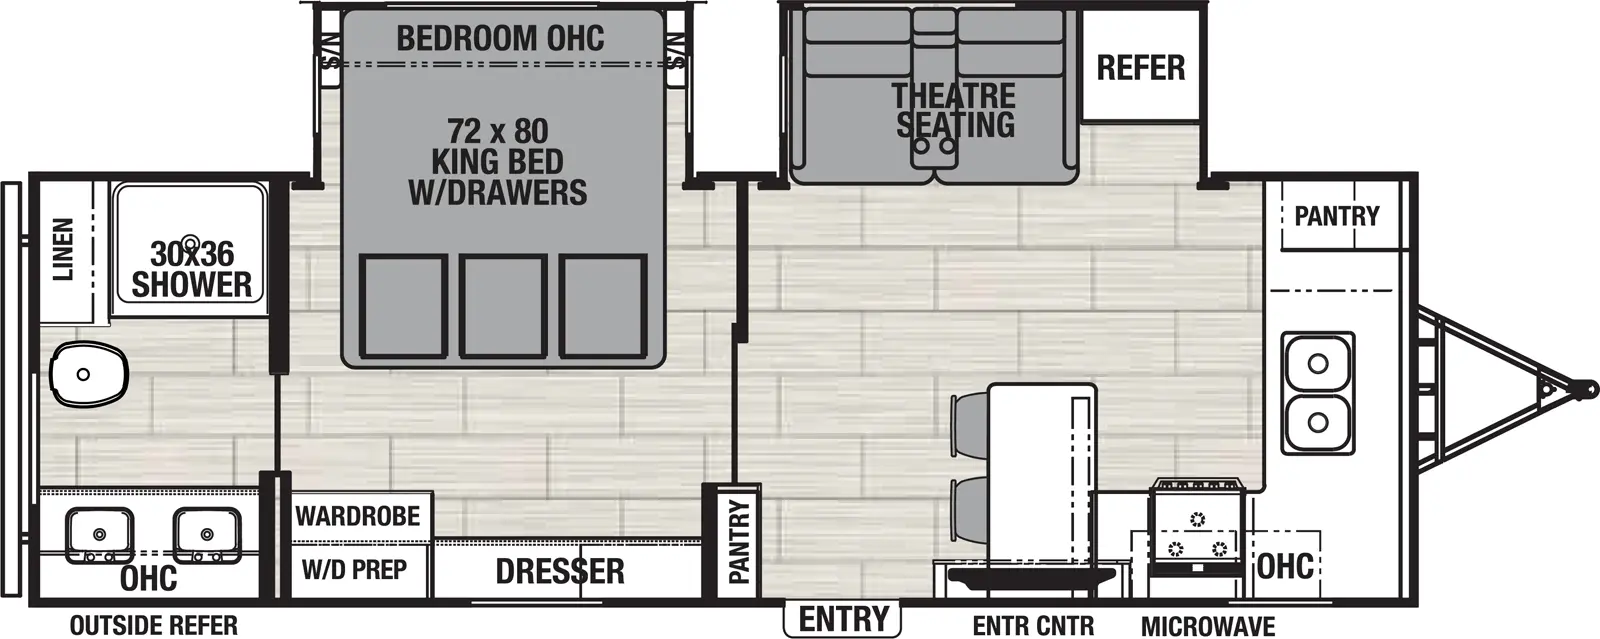 The 2565FK has 2 slide outs on the off-door side and 1 entry door. Exterior features include an outside refrigerator. Interior layout from front to back includes: front kitchen with L-shaped countertop and stools, front corner pantry, double basin sink, overhead cabinet, overhead microwave and entertainment center; off-door side slide out holding theater seating and refrigerator; pantry near entry door; bedroom with off-door slide out holding a 72 x 80 King bed with drawers, wardrobe with washer/dryer prep, and dresser; and rear bathroom with 30 x 36 shower, linen storage, toilet, and double vanity with overhead cabinet.